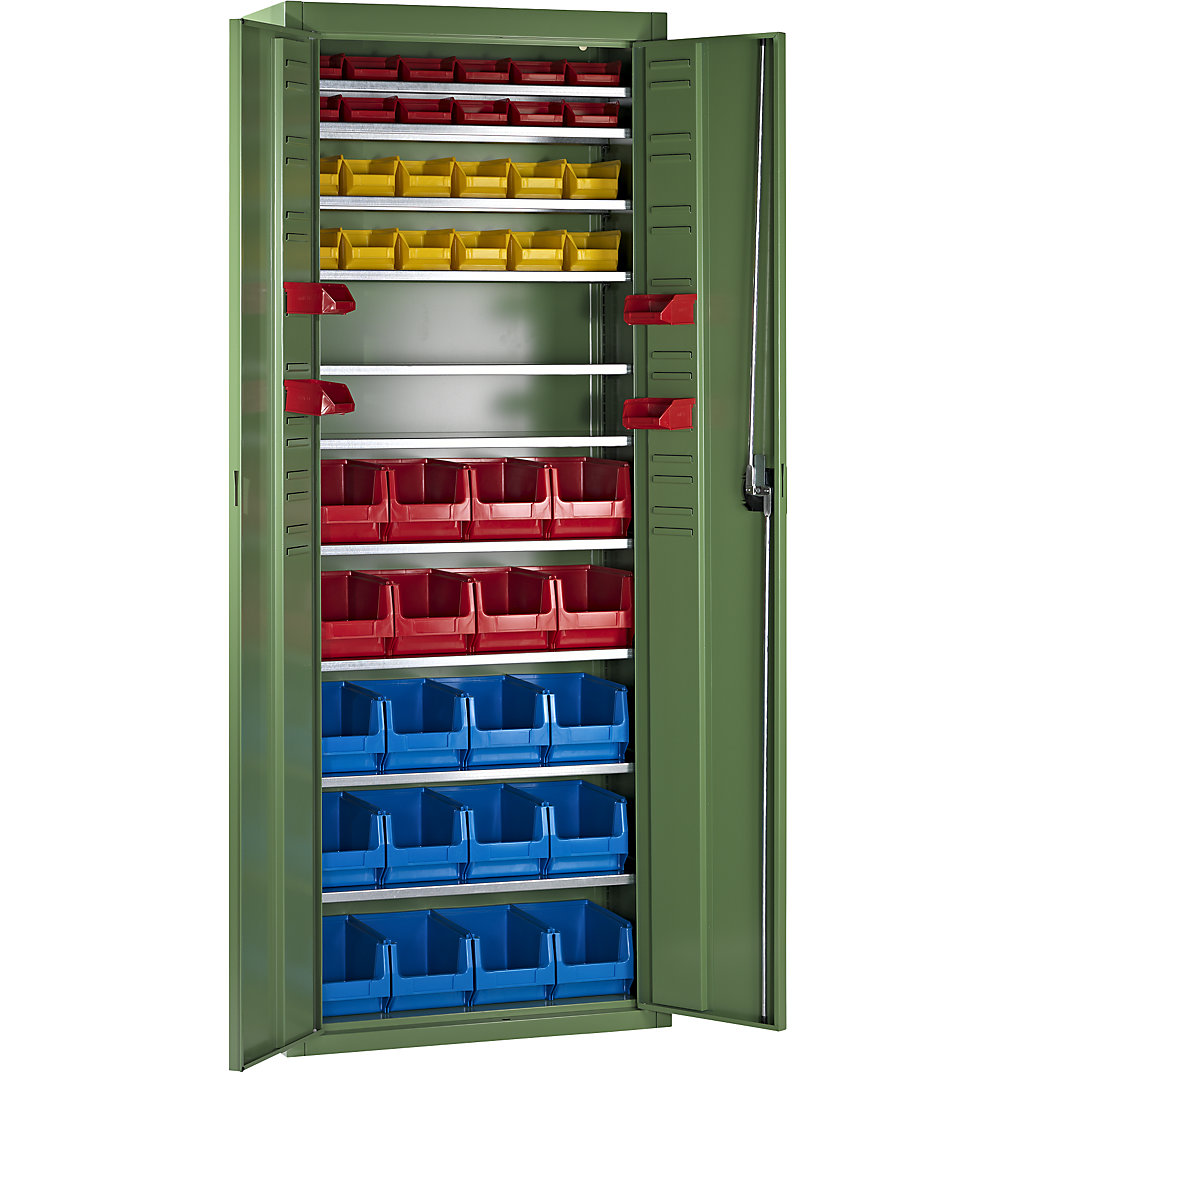 Storage cupboard with open fronted storage bins – mauser, HxWxD 1740 x 680 x 280 mm, 48 bins, single colour, reseda green, 3+ items-3